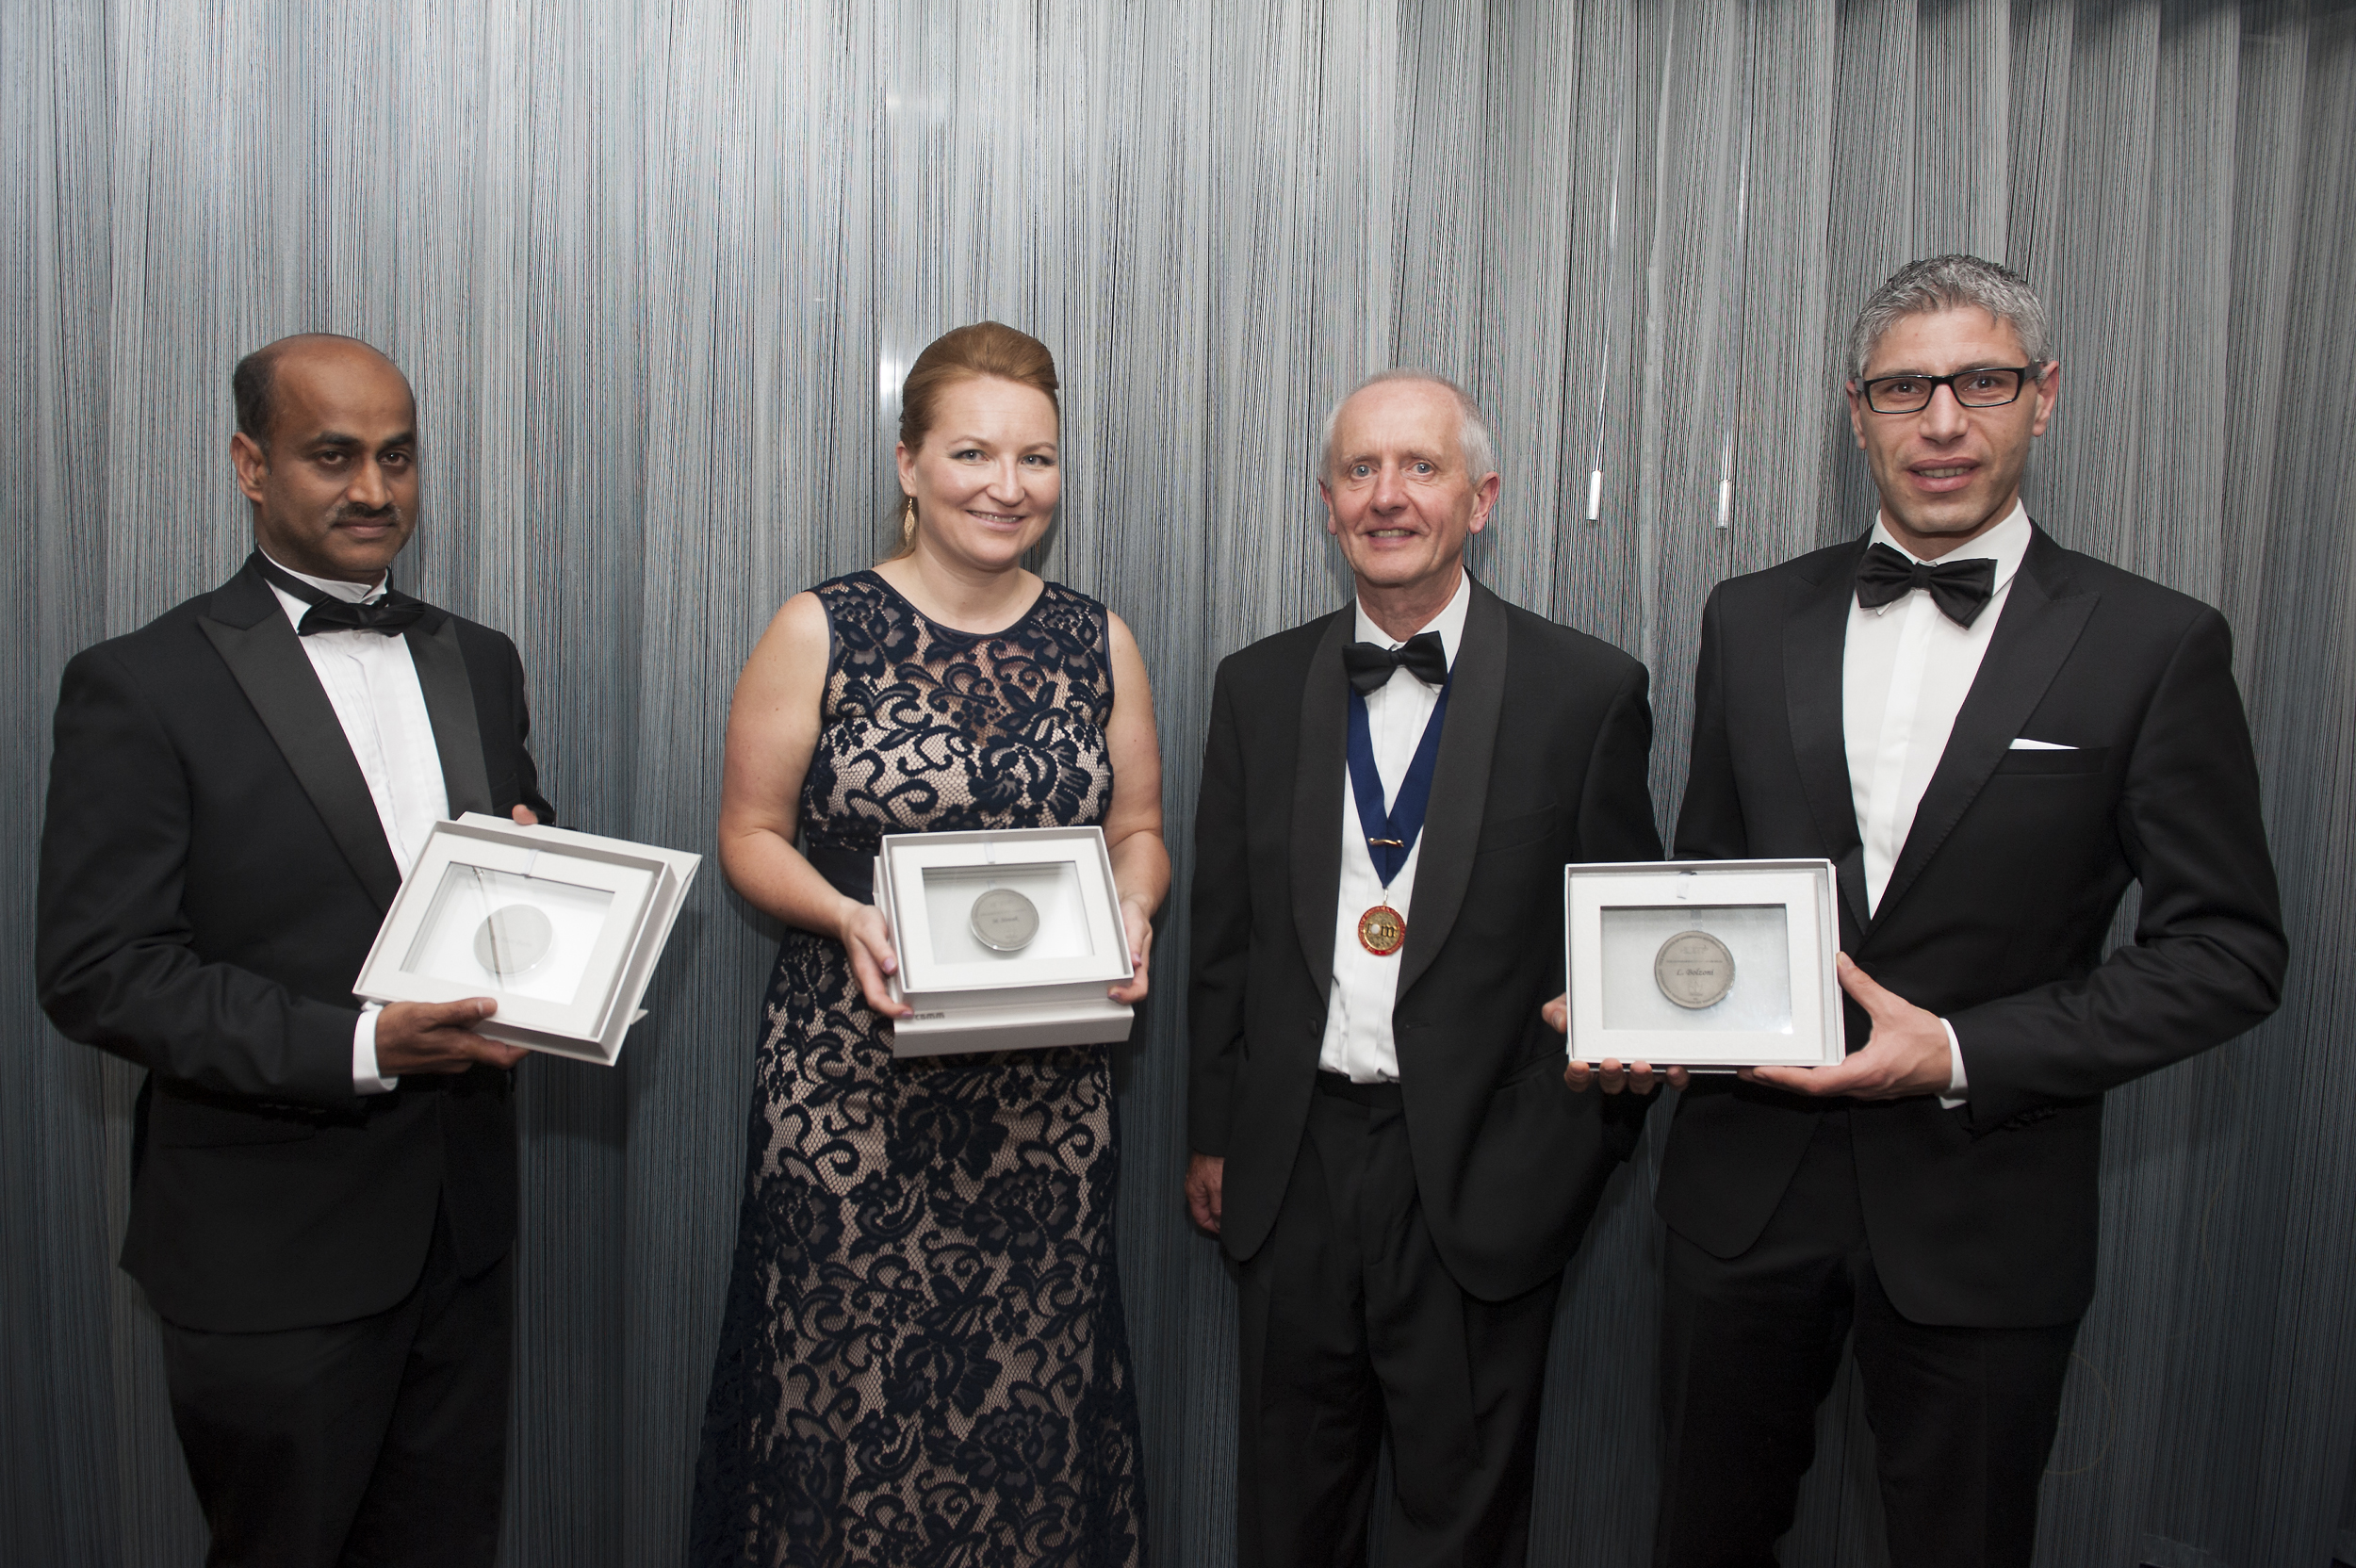 2016 Charles Hatchett Award Winners receiving their medals from IOM3. Pictured from left: Hari-Babu Nadendla, Magdalena Nowak, IOM3 President Mike Hicks, and Leandro Bolzoni.